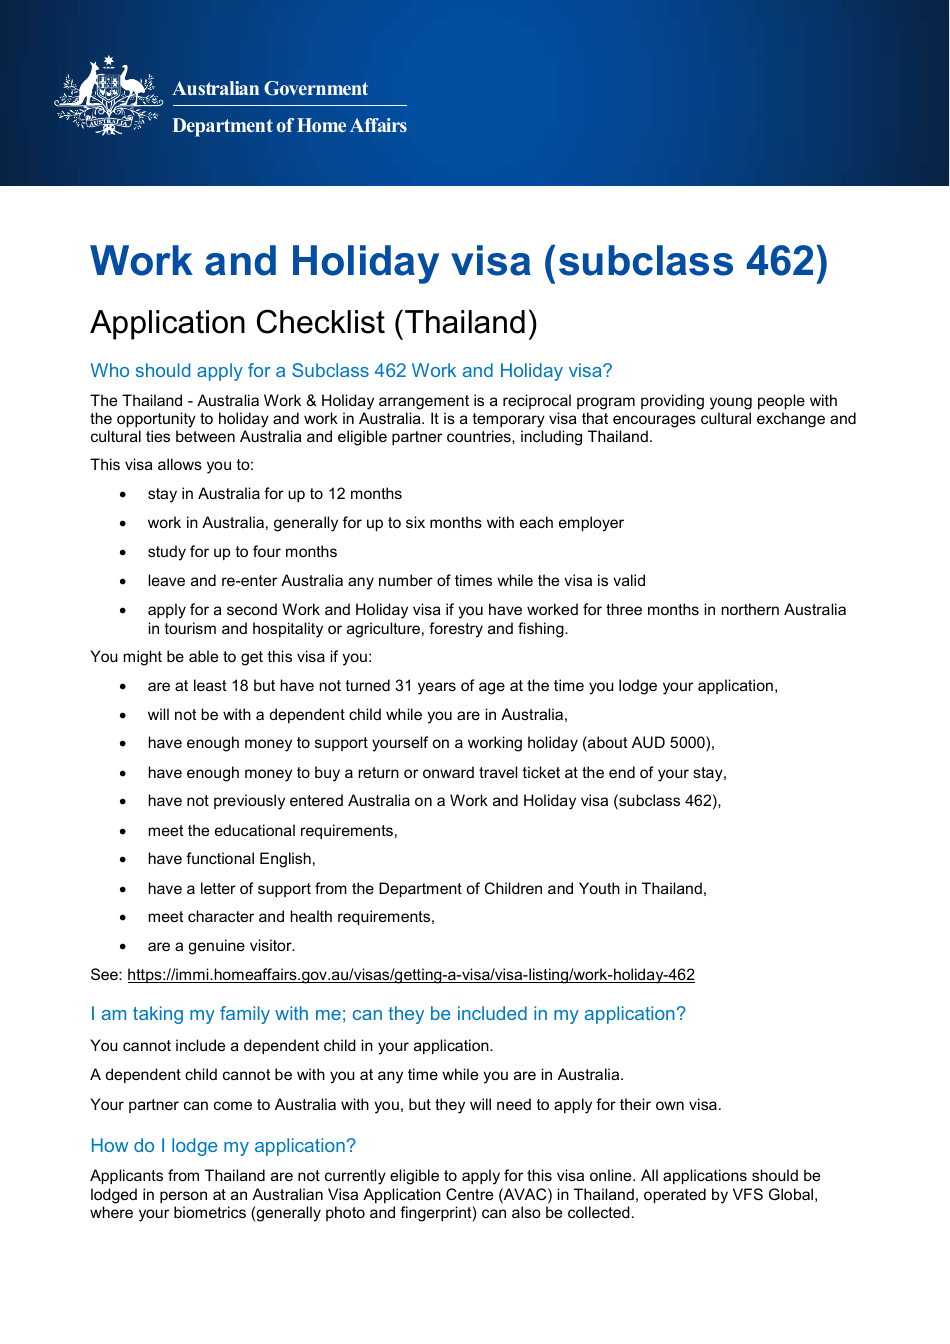 Work and Holiday Visa (Subclass 462) Application Checklist (Thailand) - Australia, Page 1